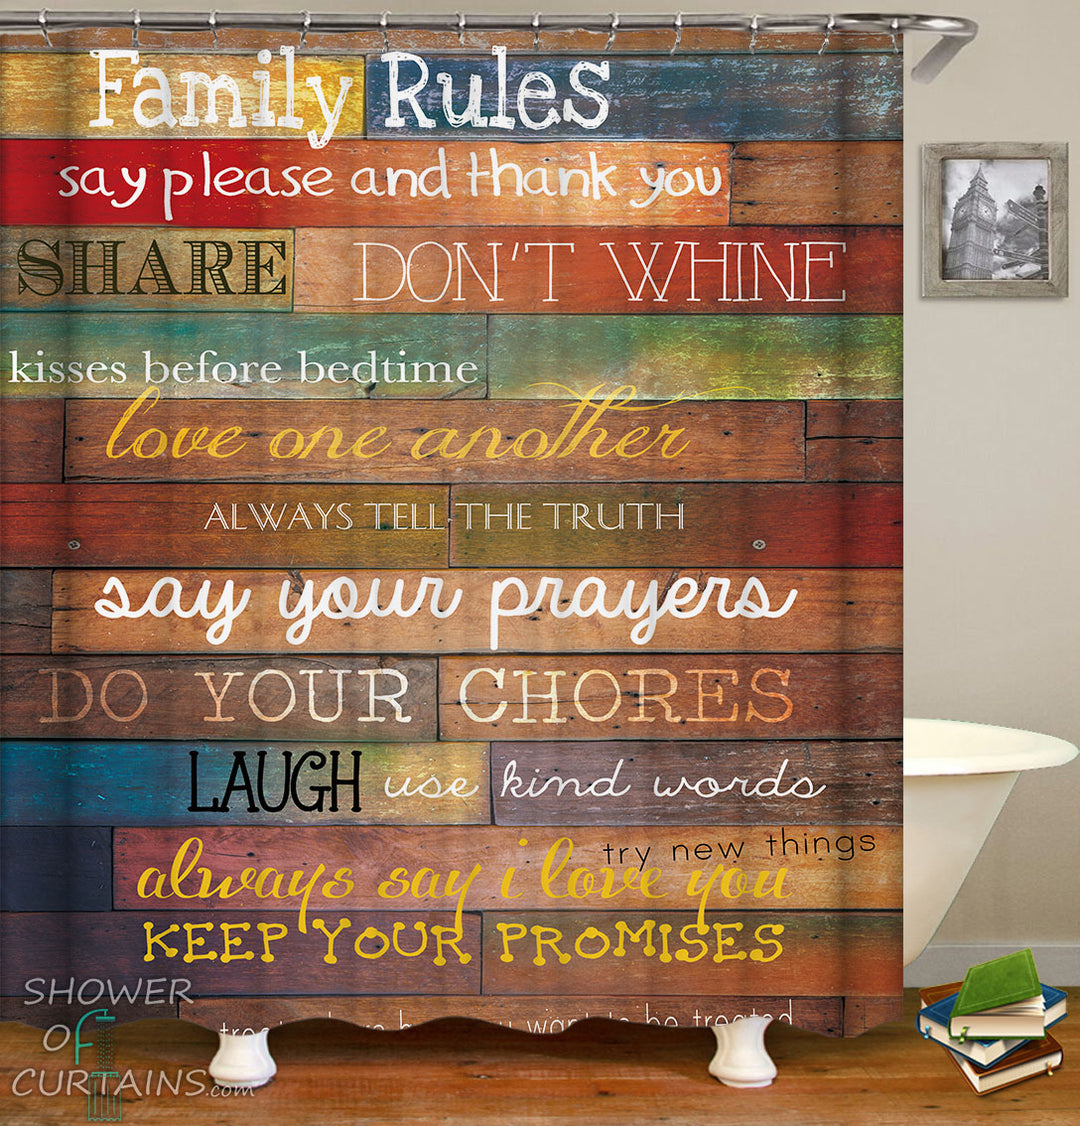 Shower Curtain of Family Rules Wooden Deck